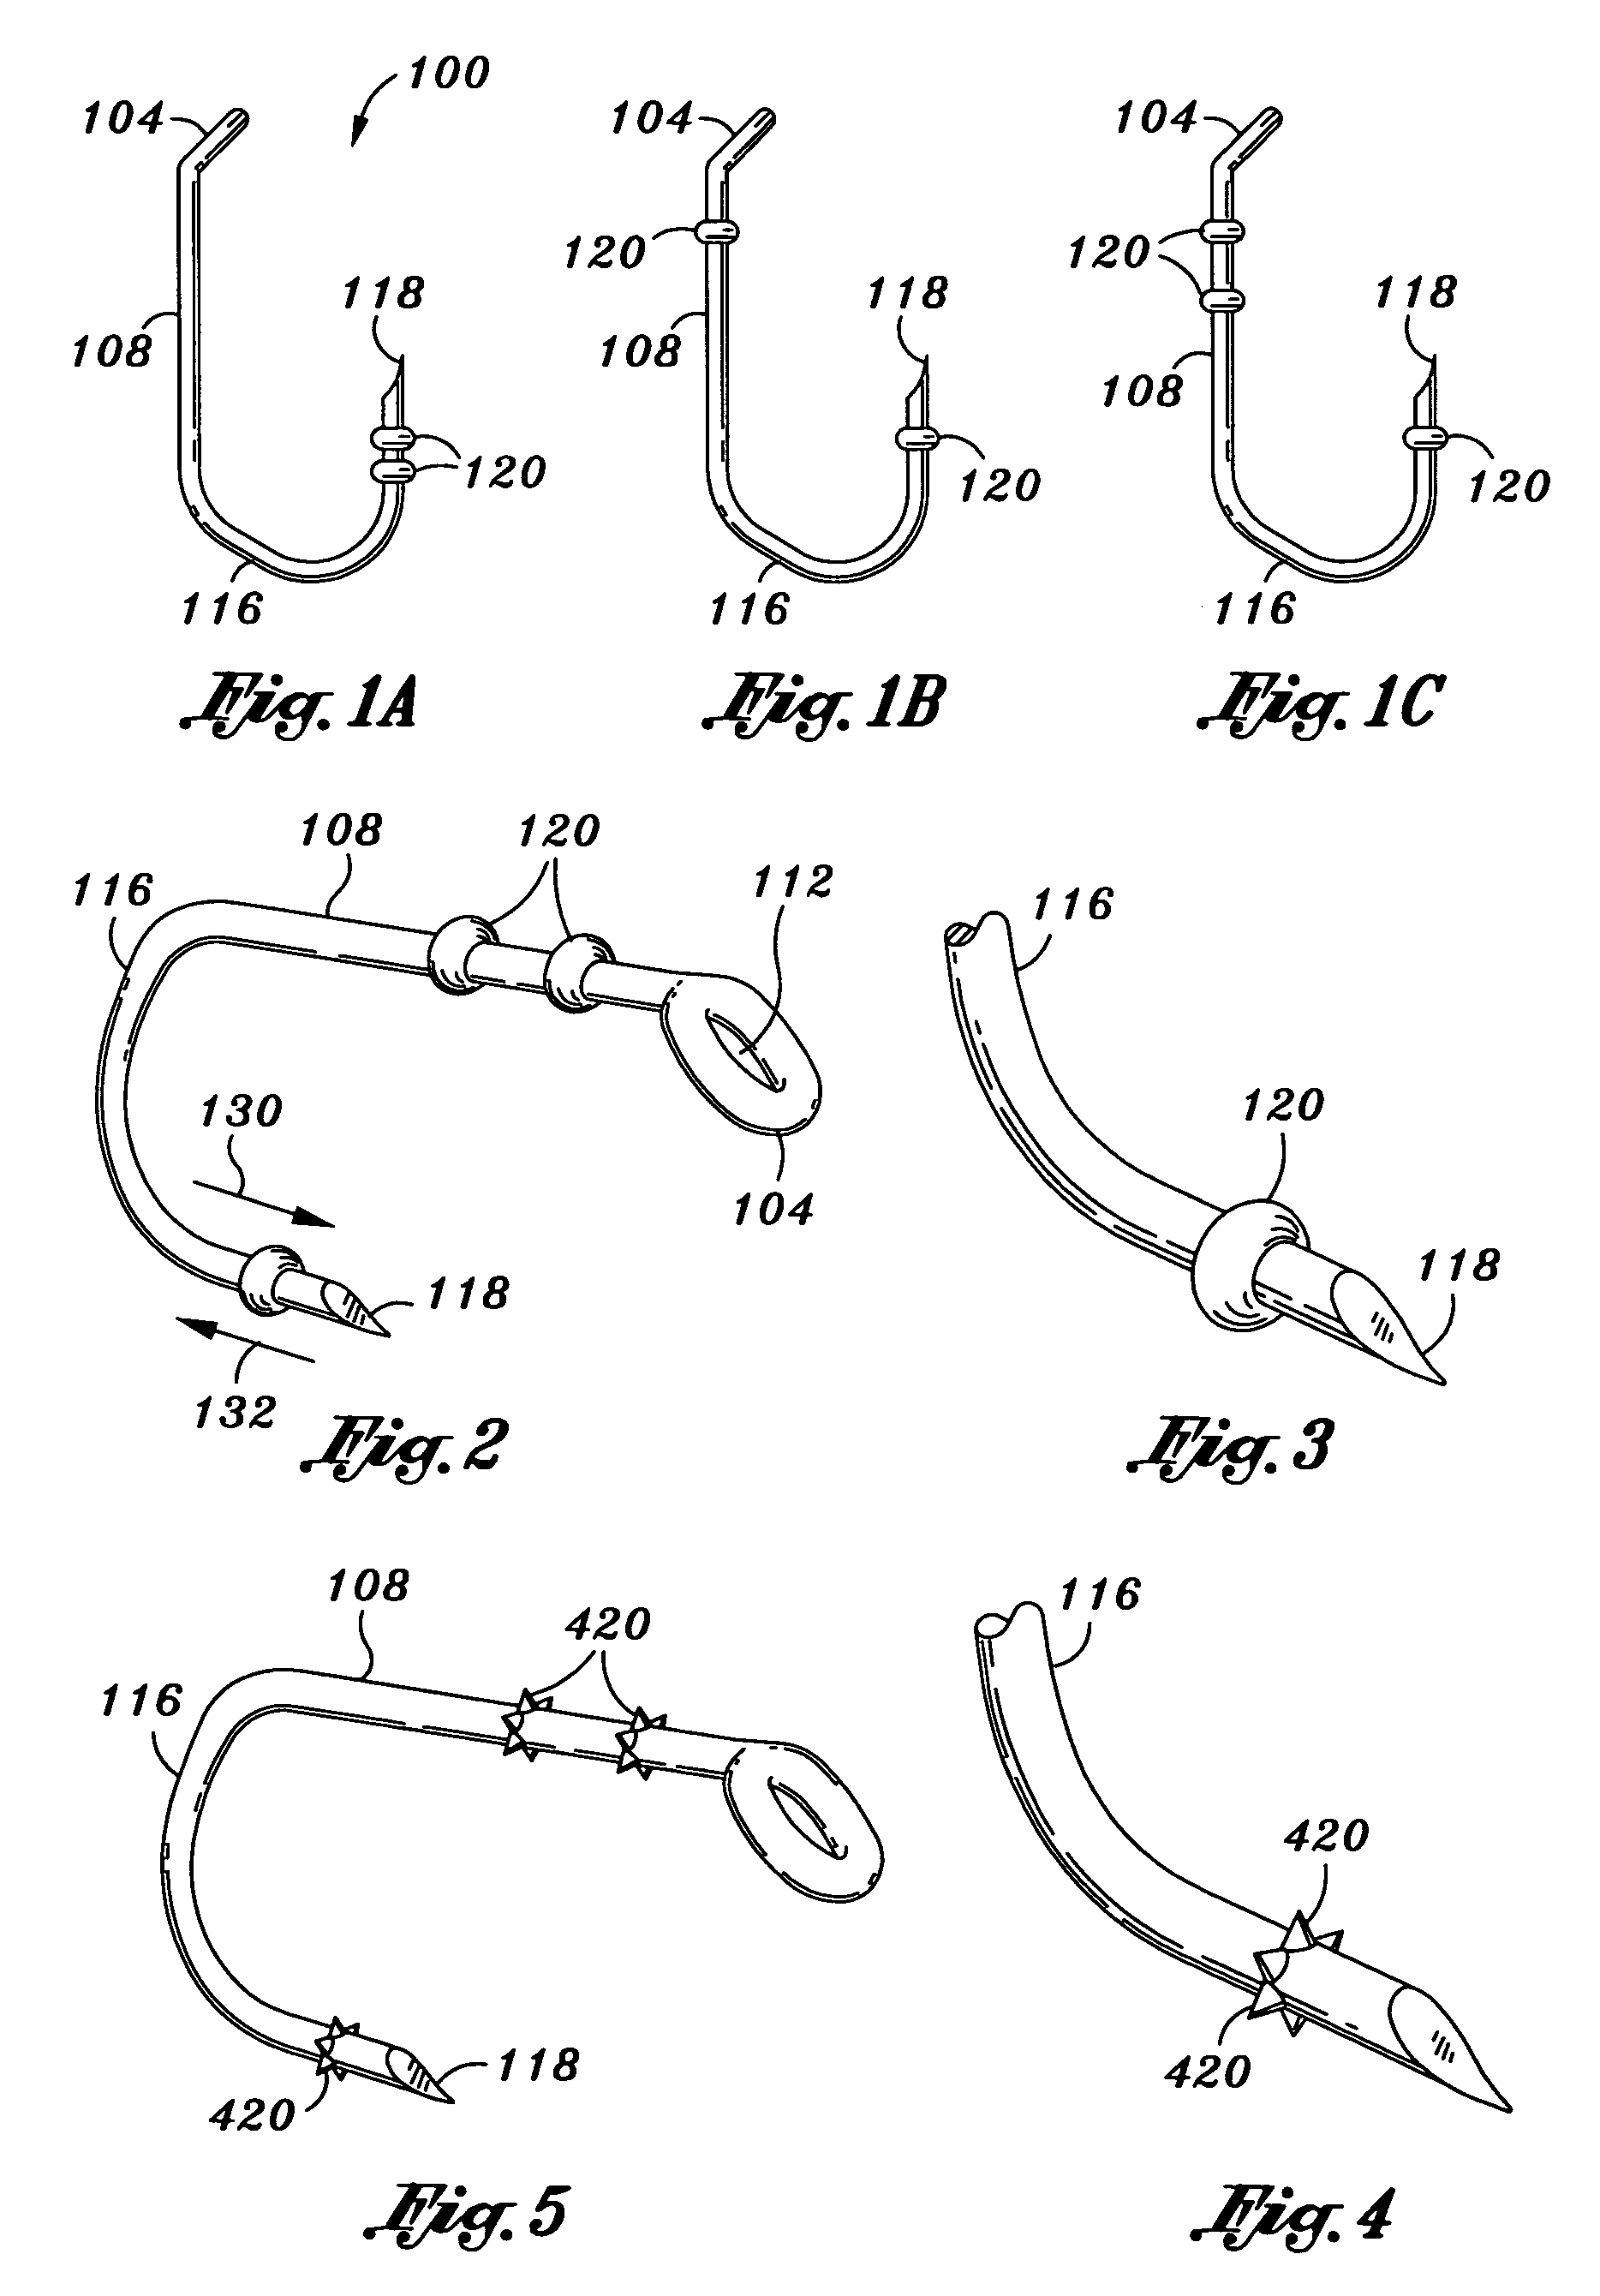 Modified fishhook for catch and release applications